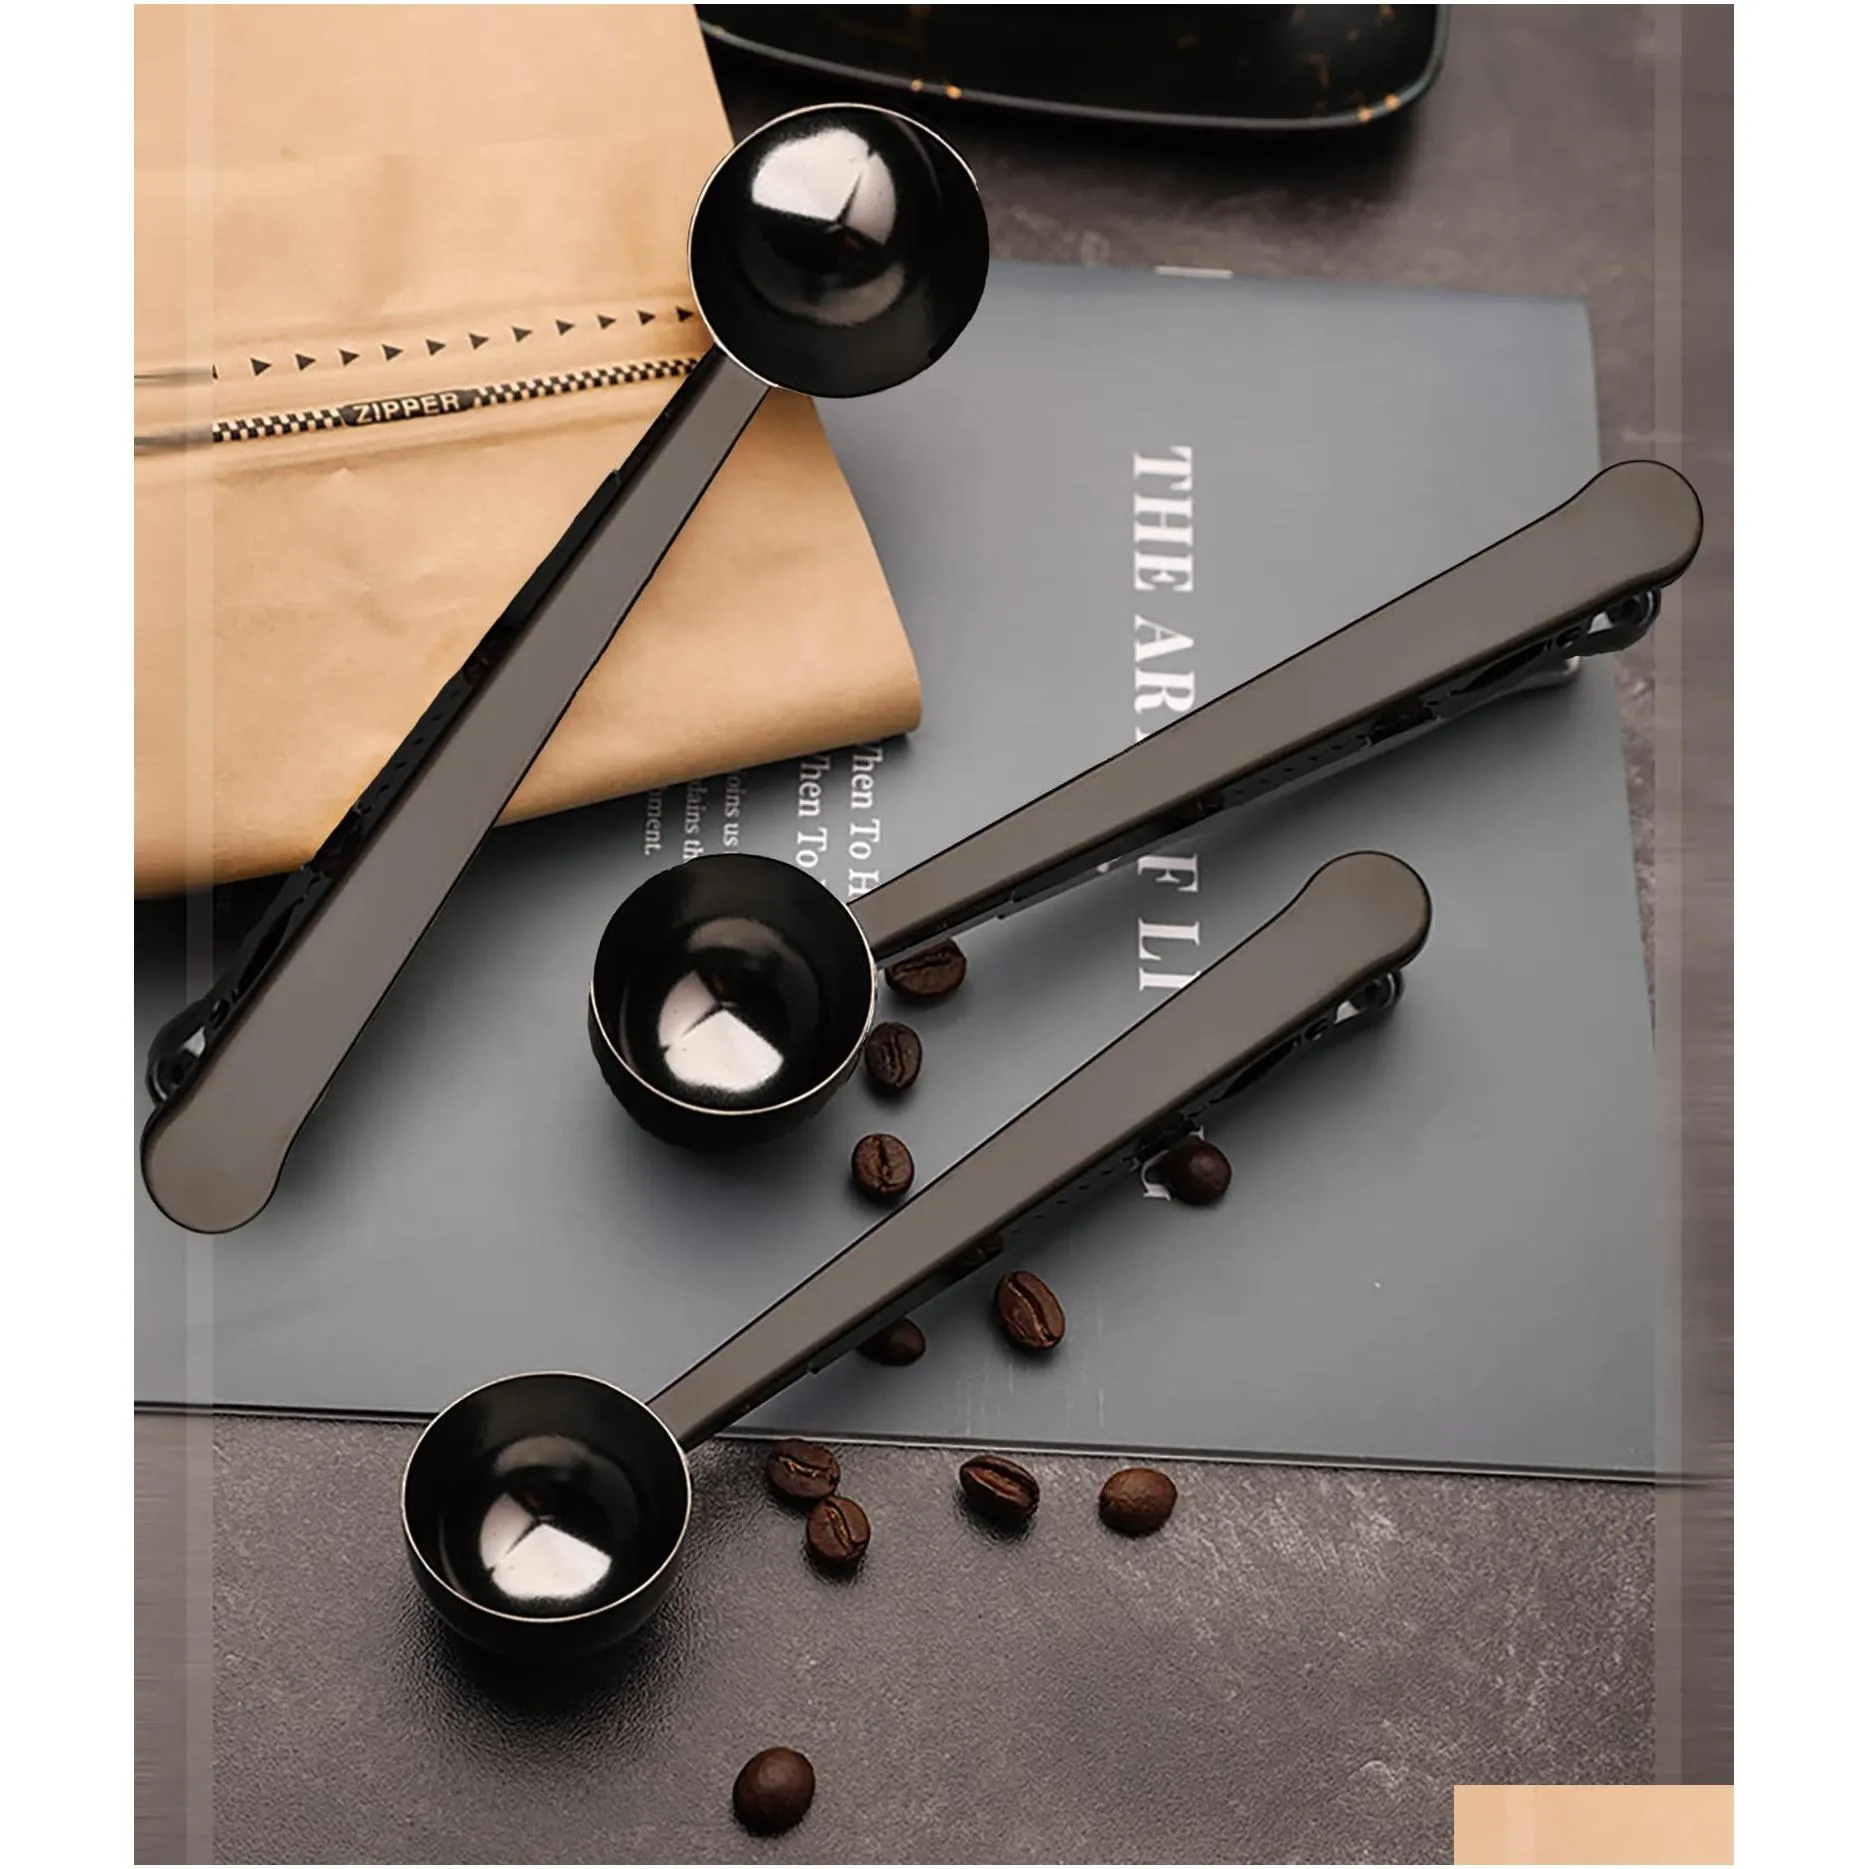 spoons coffee scoop stainless steel measuring spoon with bag clip coasters for ground espresso whole beans or tea home kitchen access